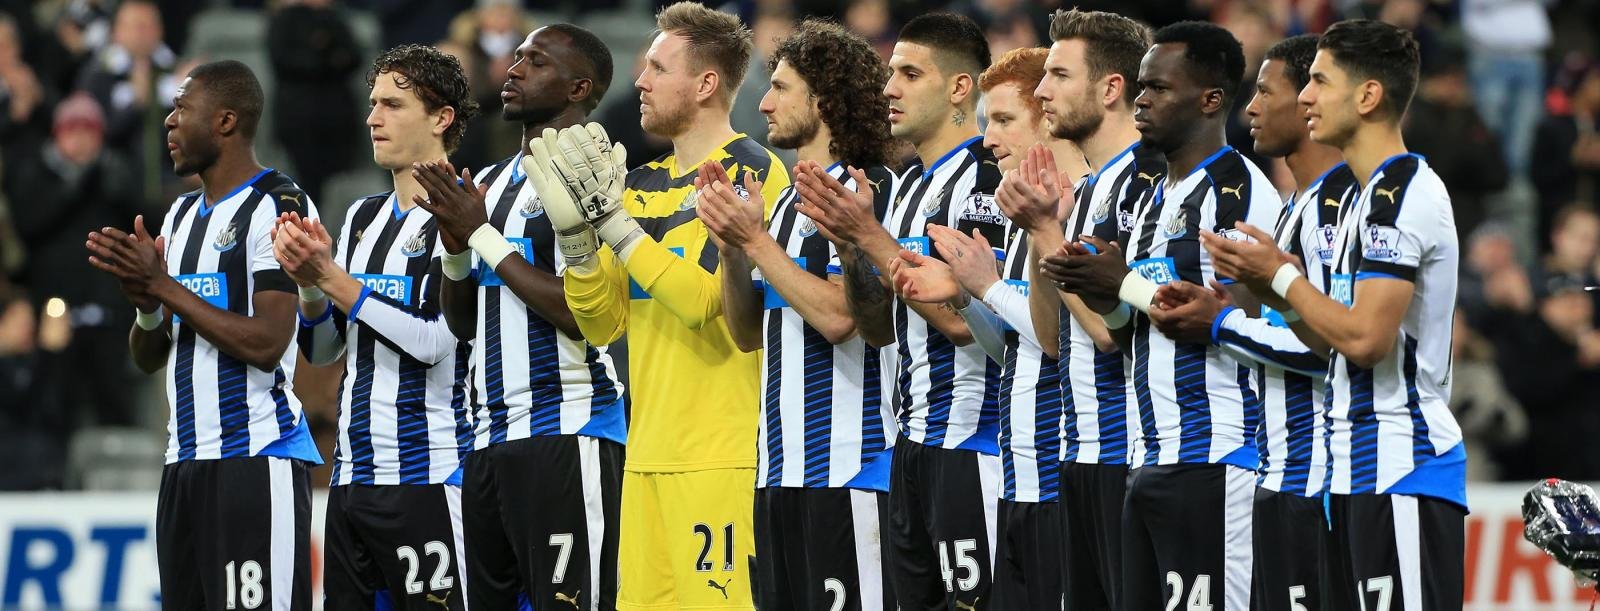 Are smaller pitches affecting Newcastle’s away form?